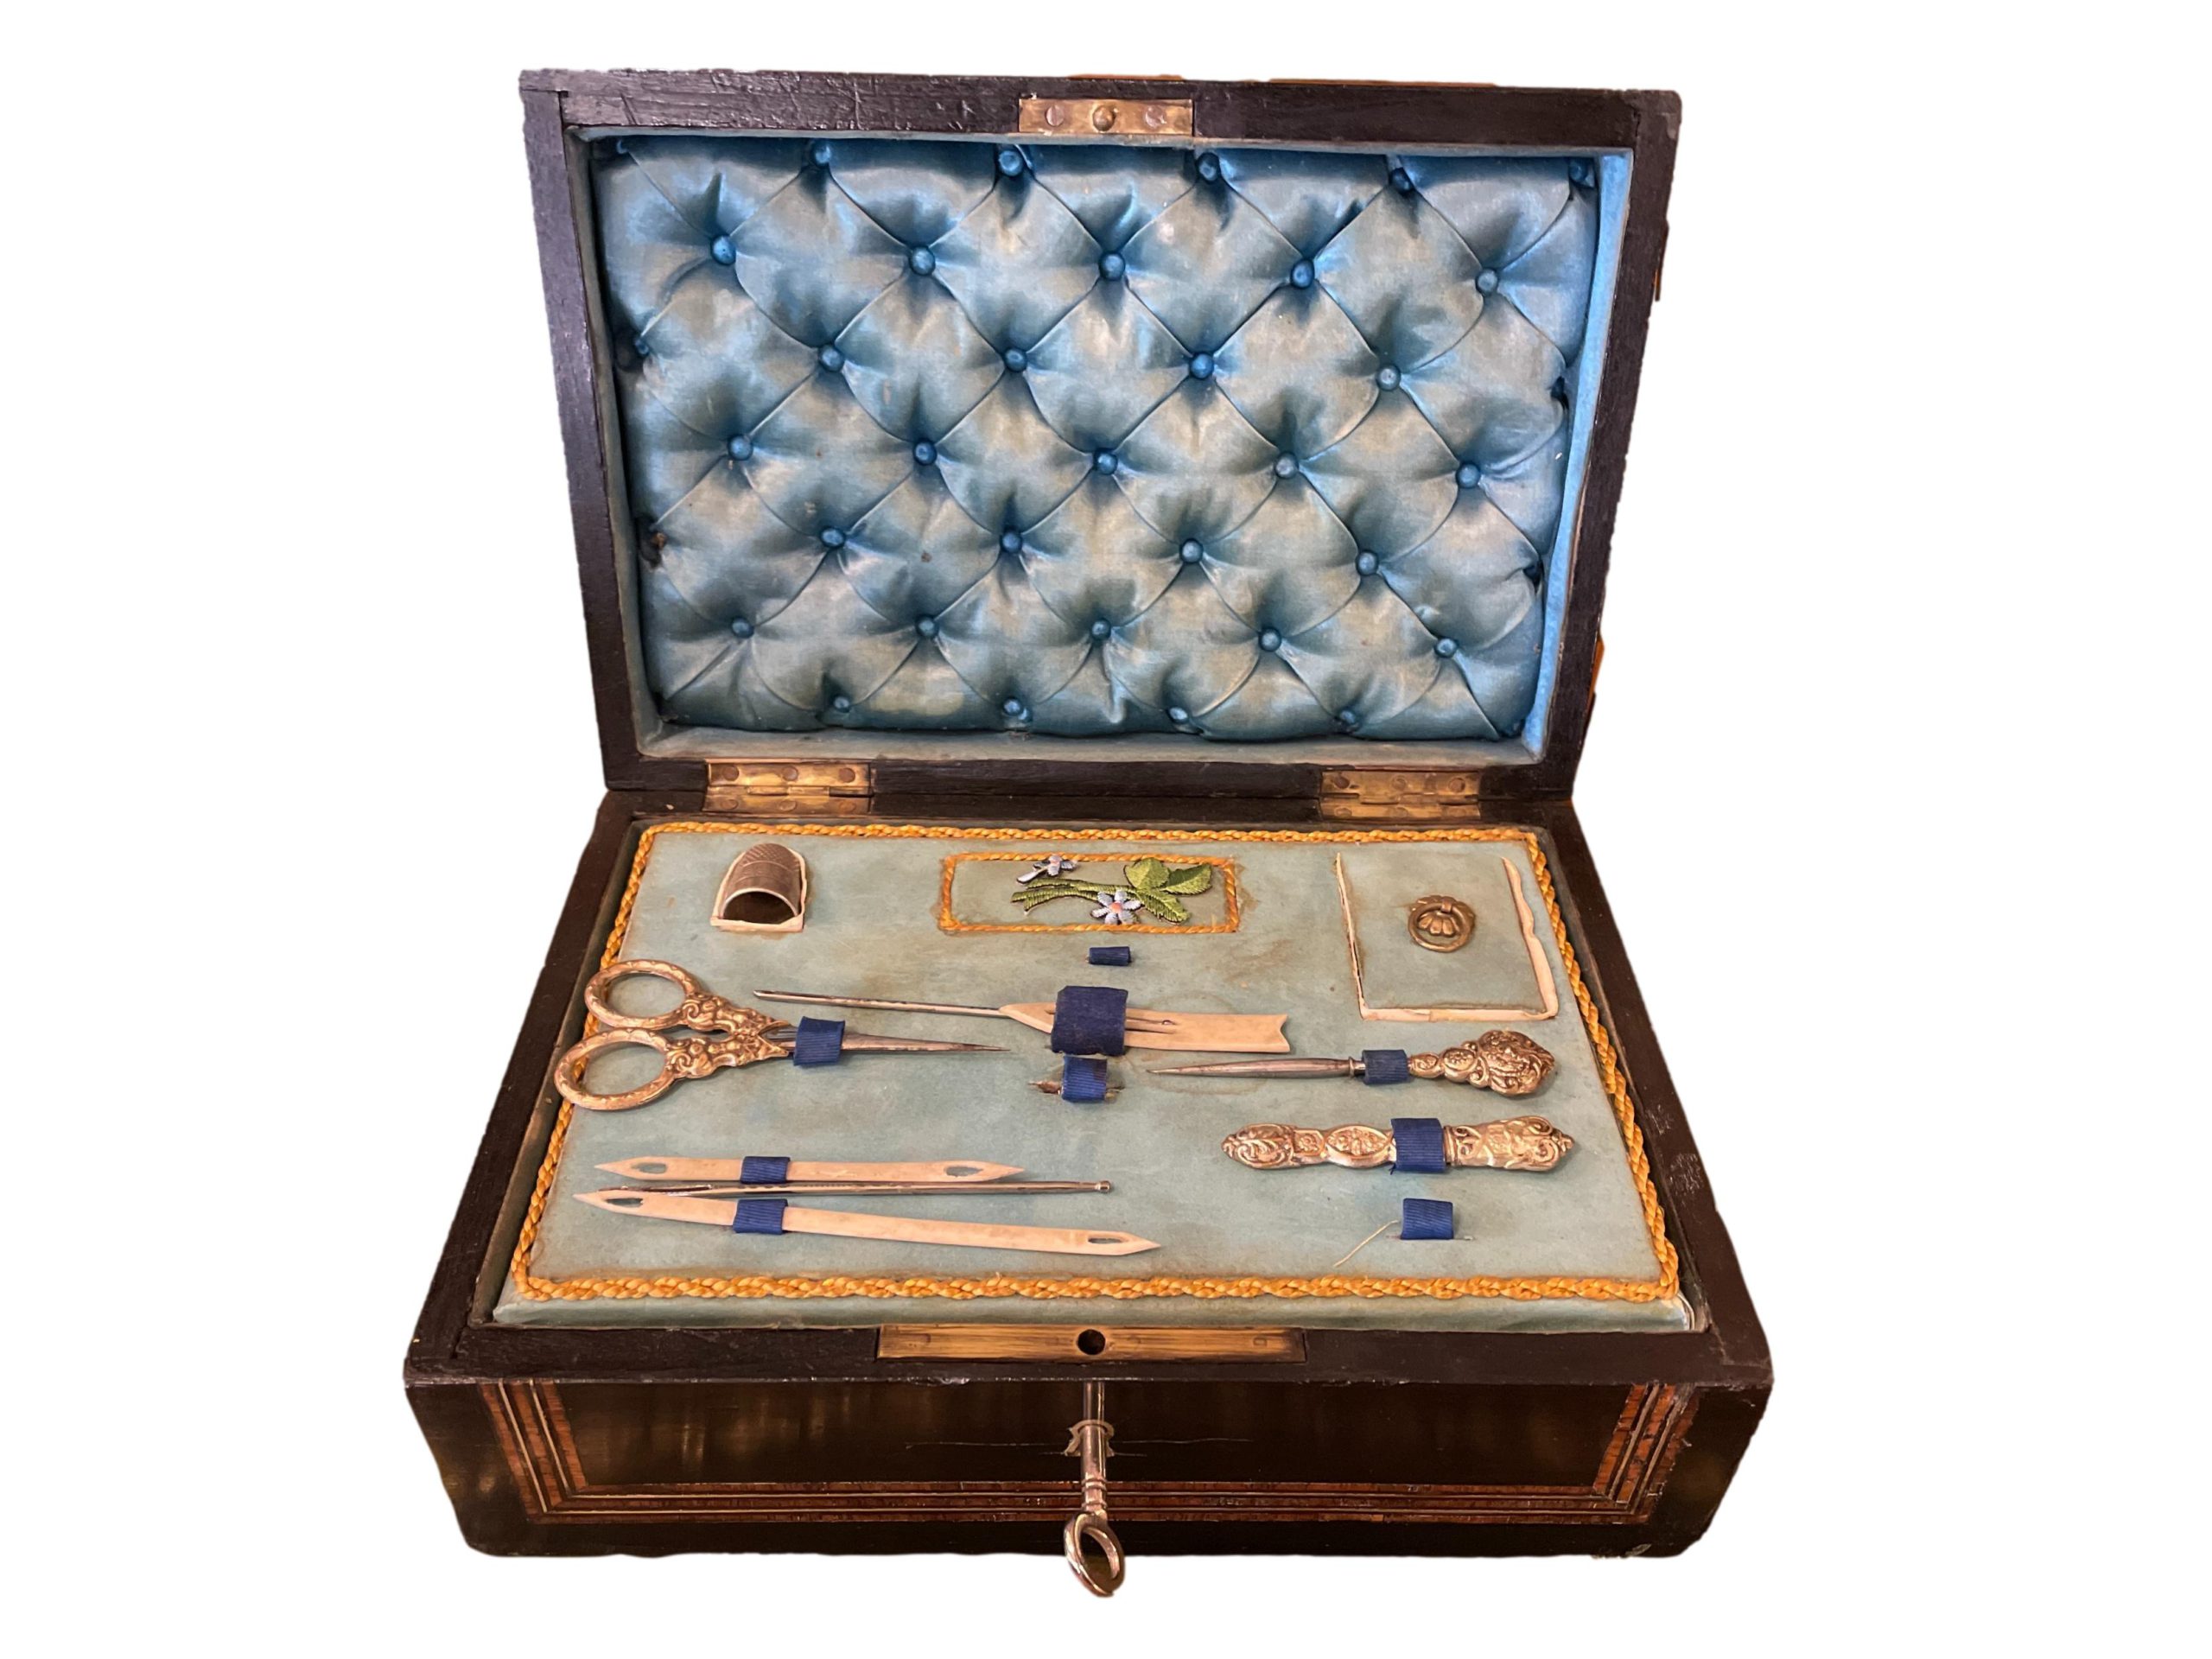 Napoleon Palais Royale sewing box with key and part original contents. Ebonised wood exterior with tulip wood veneer, brass inlay and cartouche. The inside is  lined with padded pale blue silk to the lid and base with removable tray housing the sewing tools. Napoleon III 1850-1899. Main photo showing box with lid open and tool tray in place.